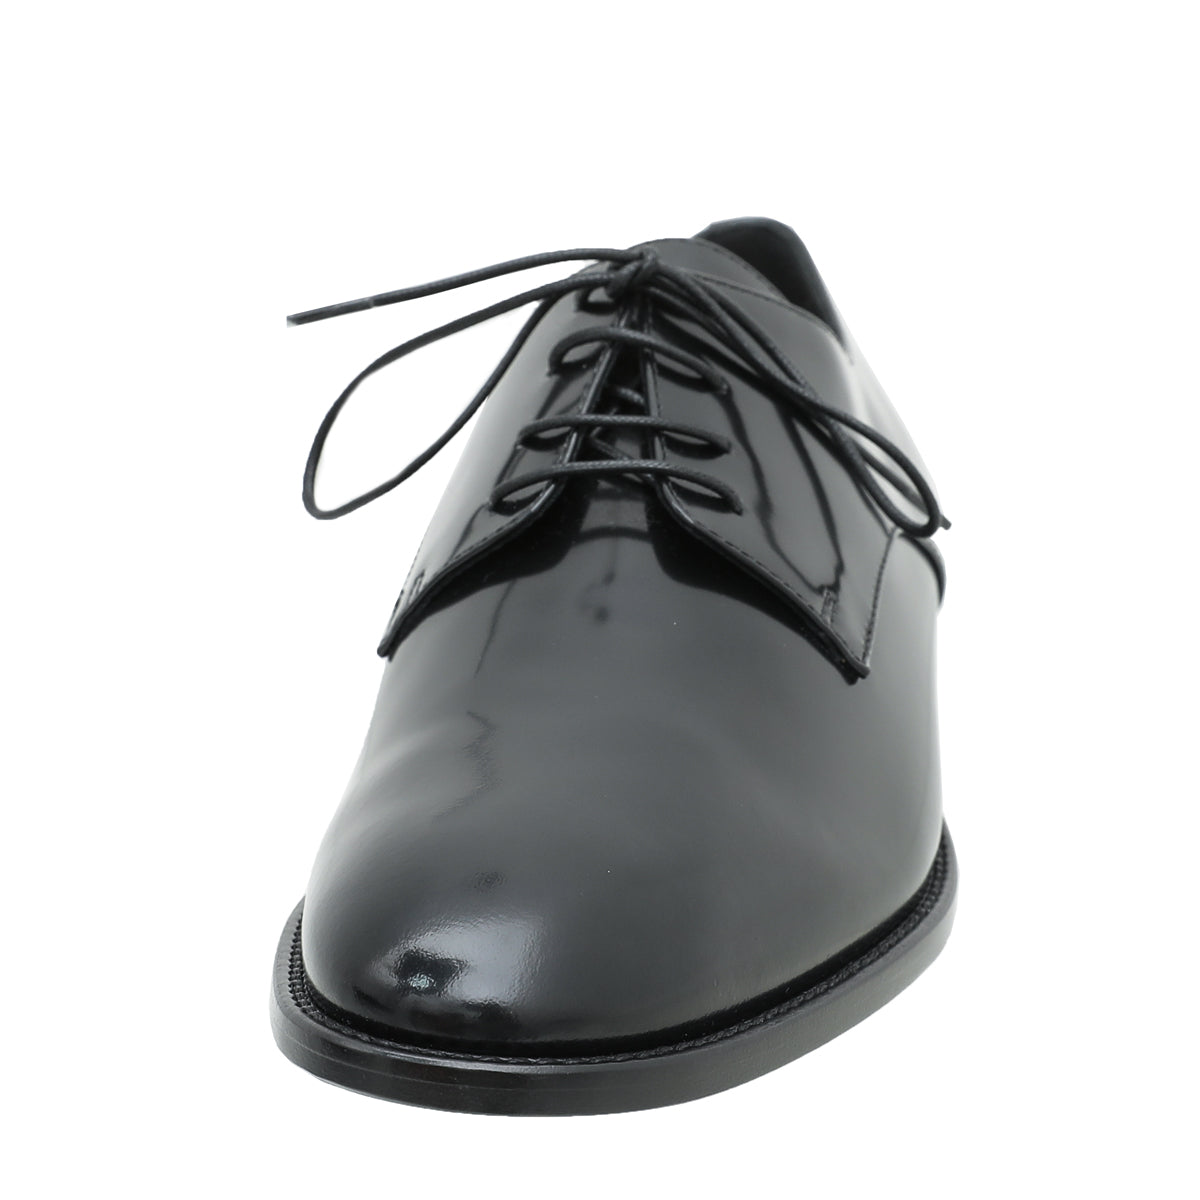 Christian Dior Black Timeless Derby Shoes 38.5